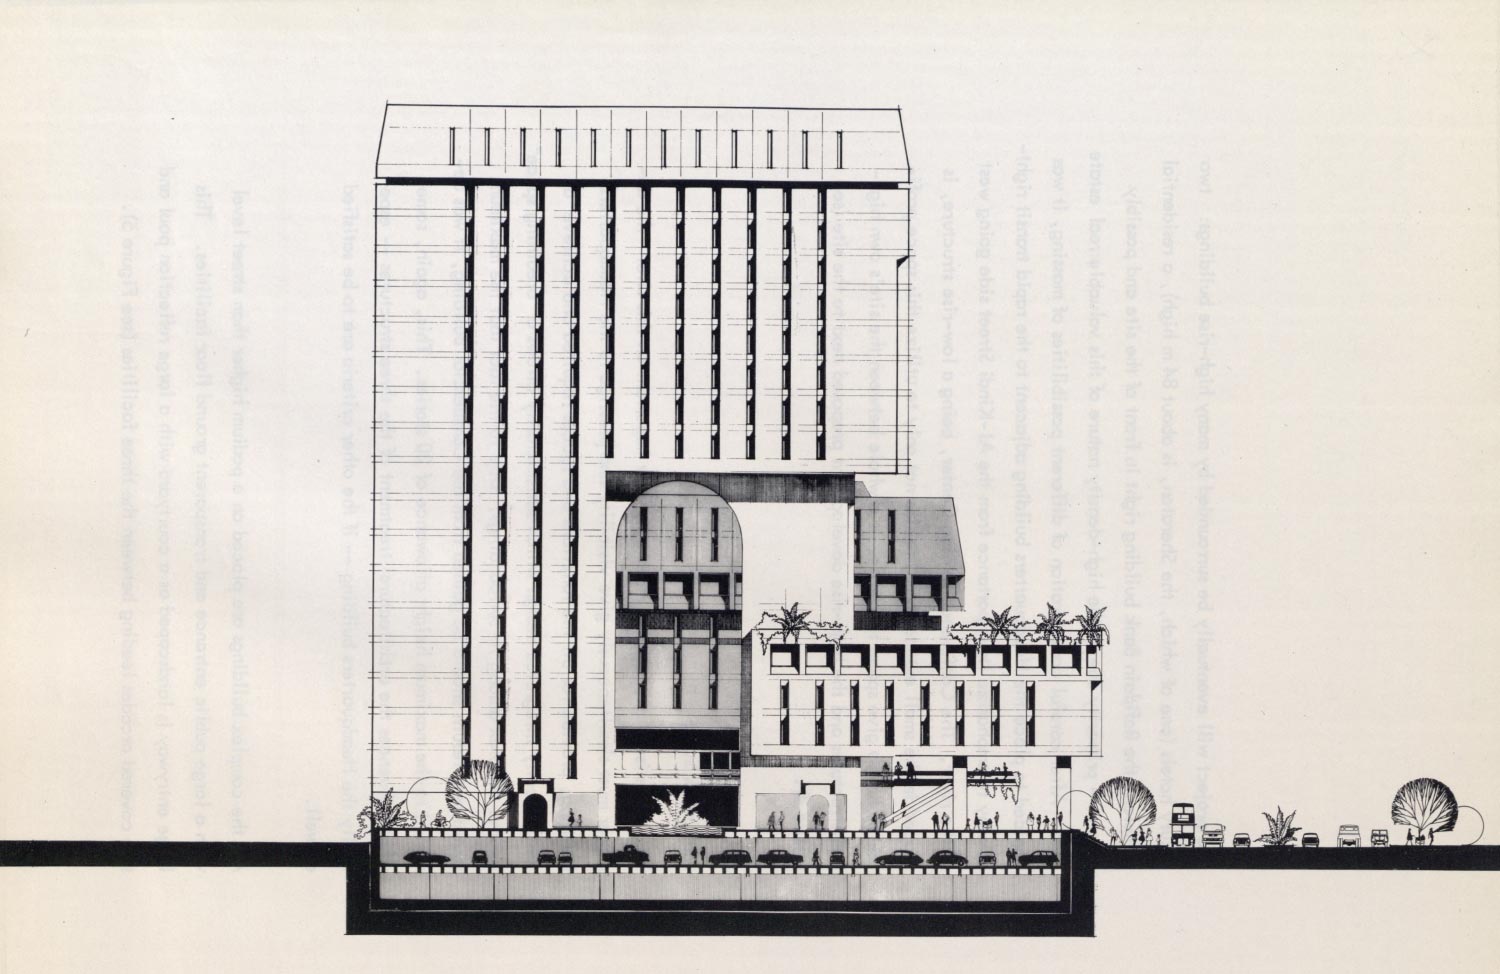 Elevation of the complex, showing a ten-story arched opening in the Commercial building that provides views to the Headquarters building